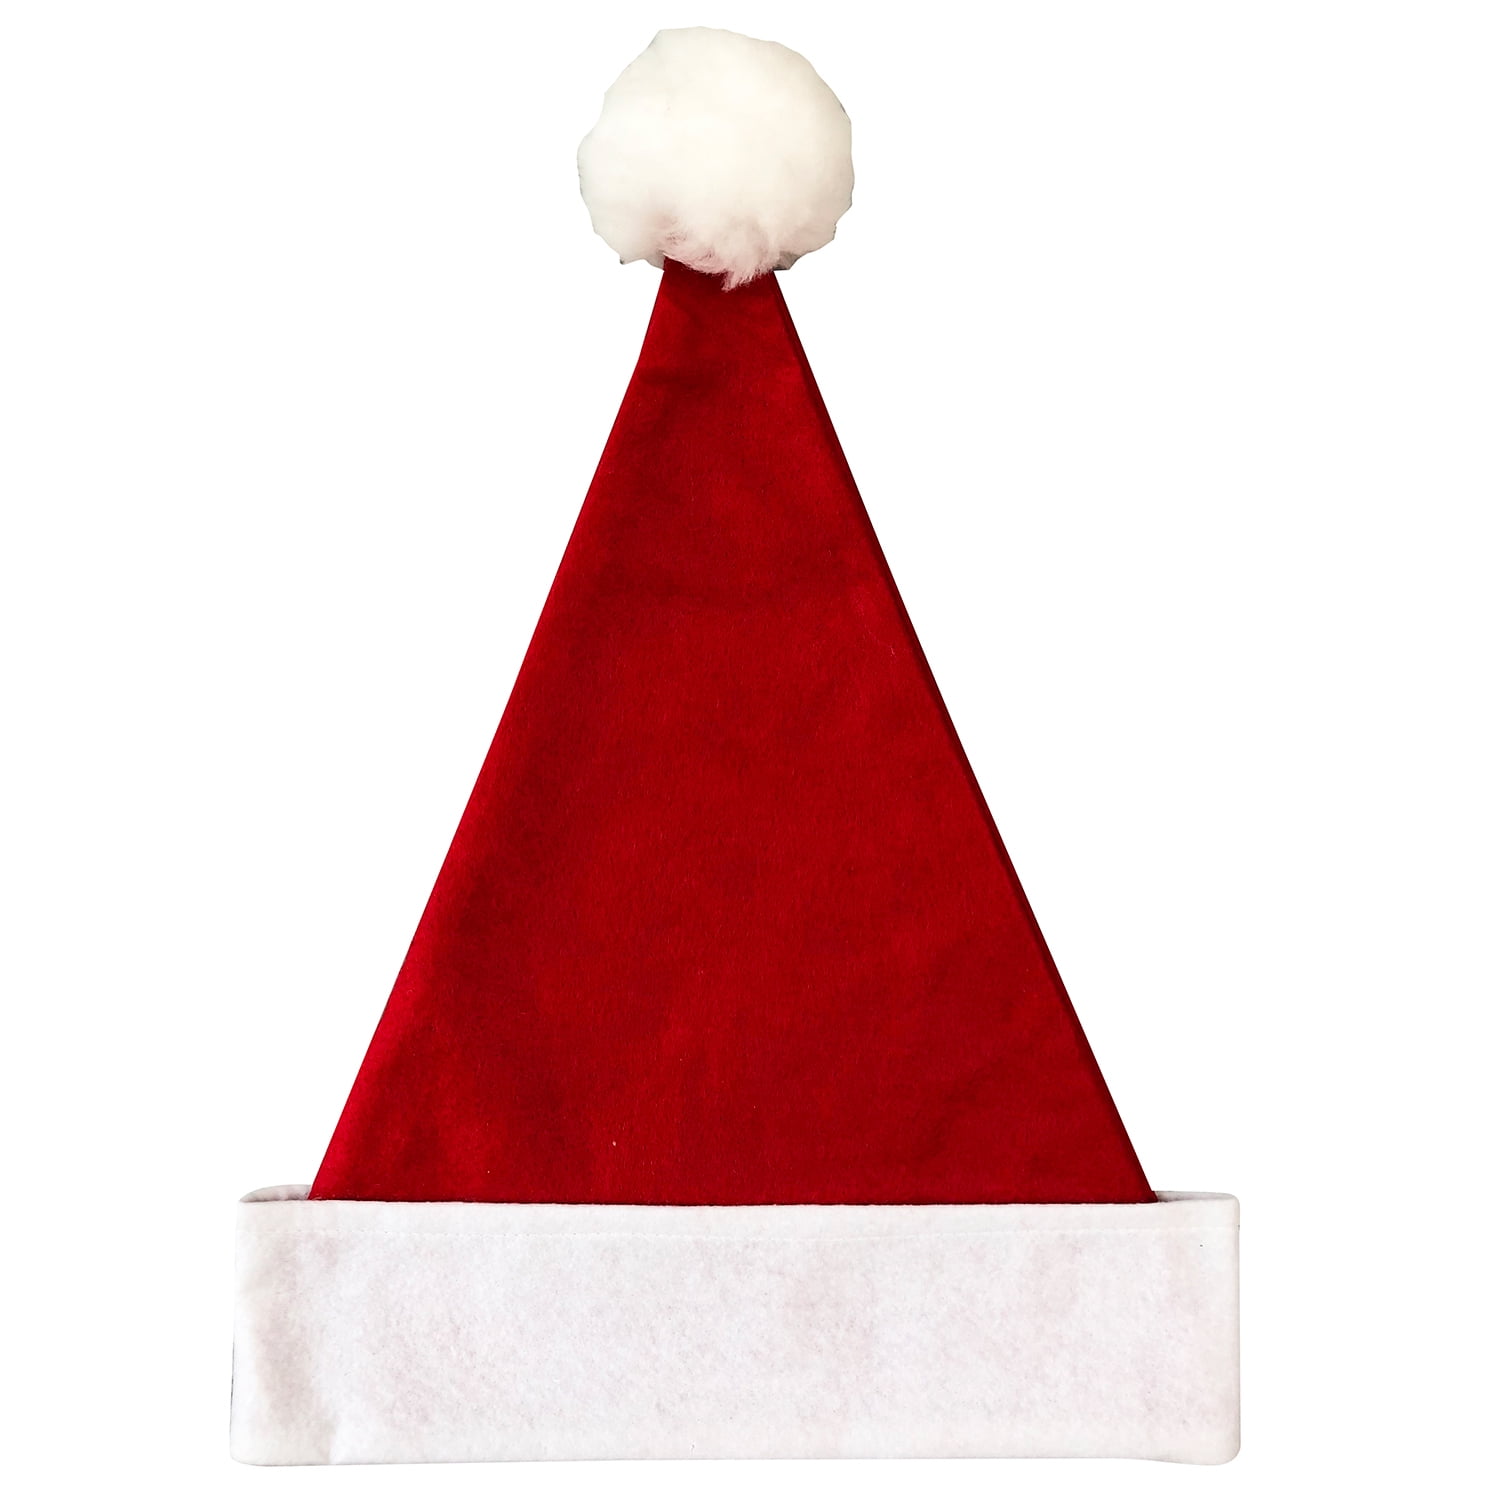 Holiday Time Felt Red Traditional Santa Hat, Large, 17In x 12.5In, Adult, Unisex